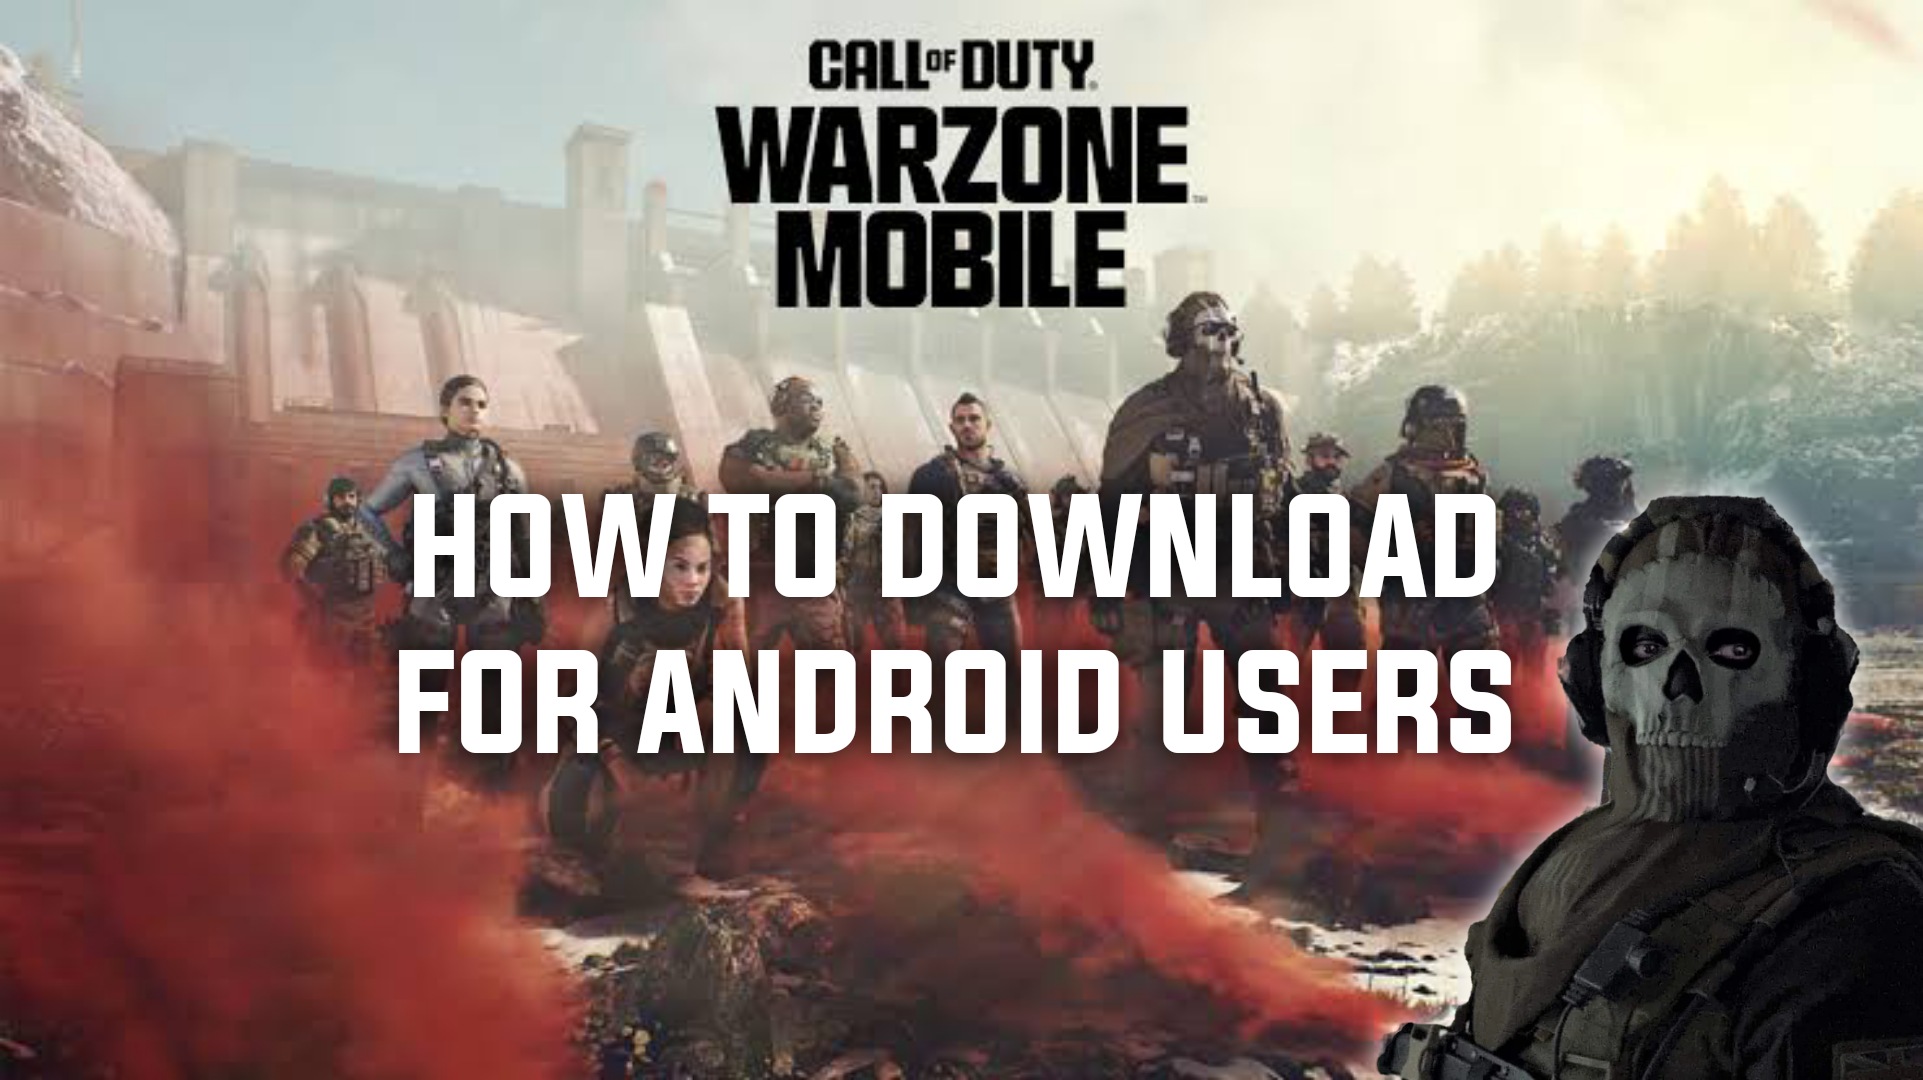 STEPS TO DOWNLOAD: WARZONE Mobile (ANDROID) - Call of Duty